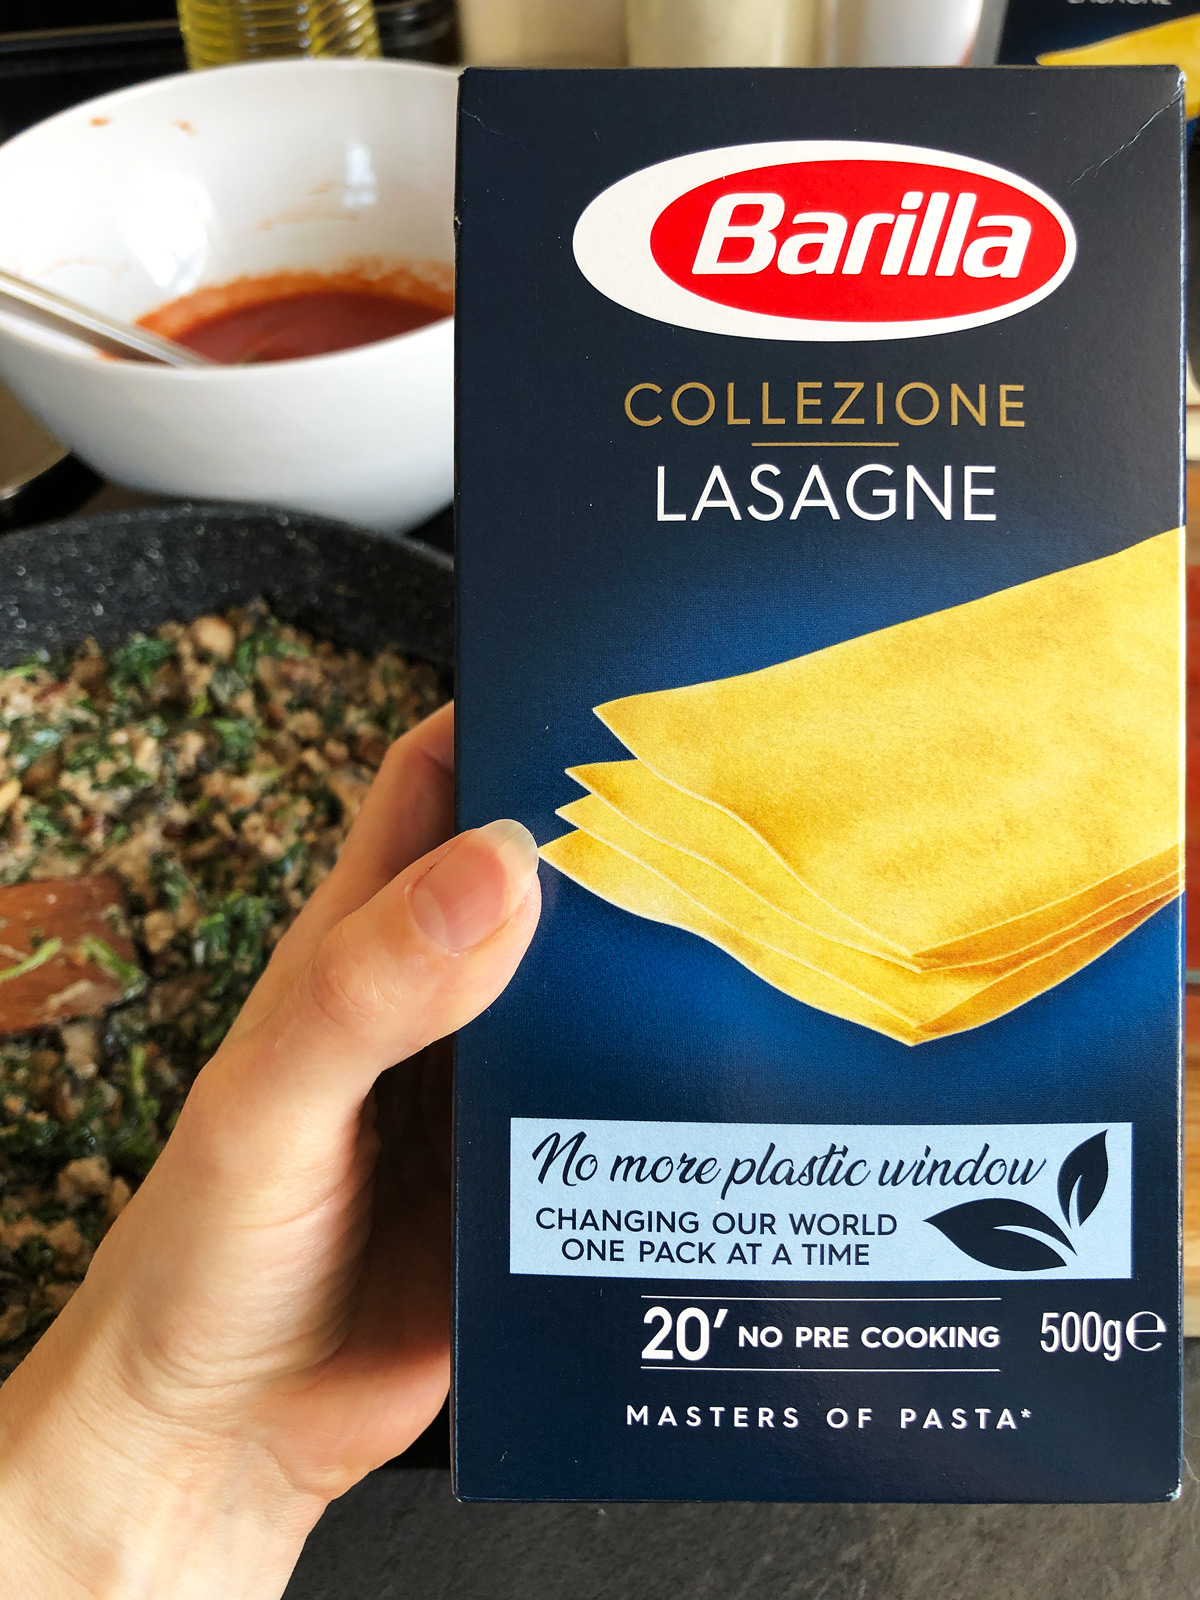 A hand holding Barilla lasagne in a blue packaging.